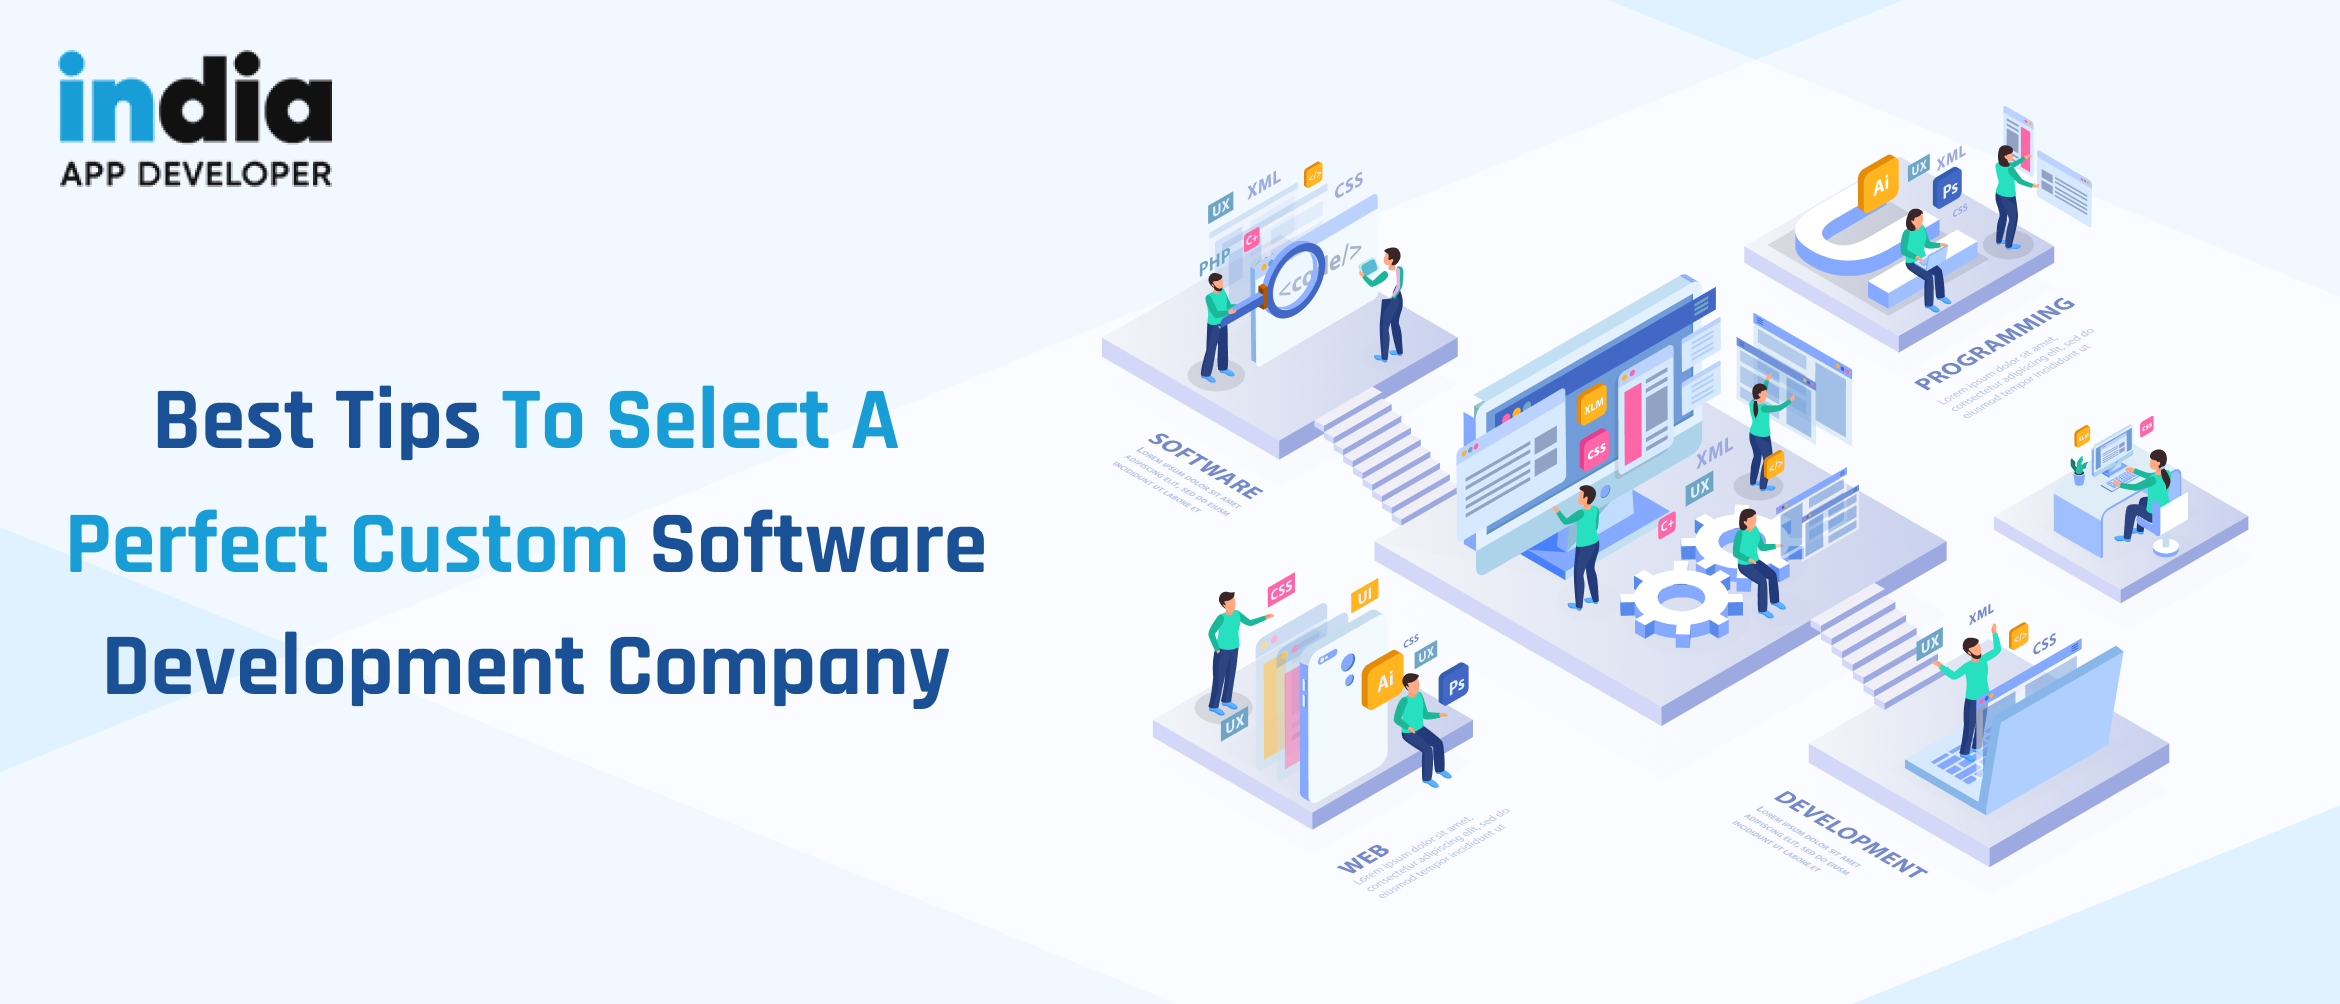 Best tips to Select a Perfect custom software development company 2022